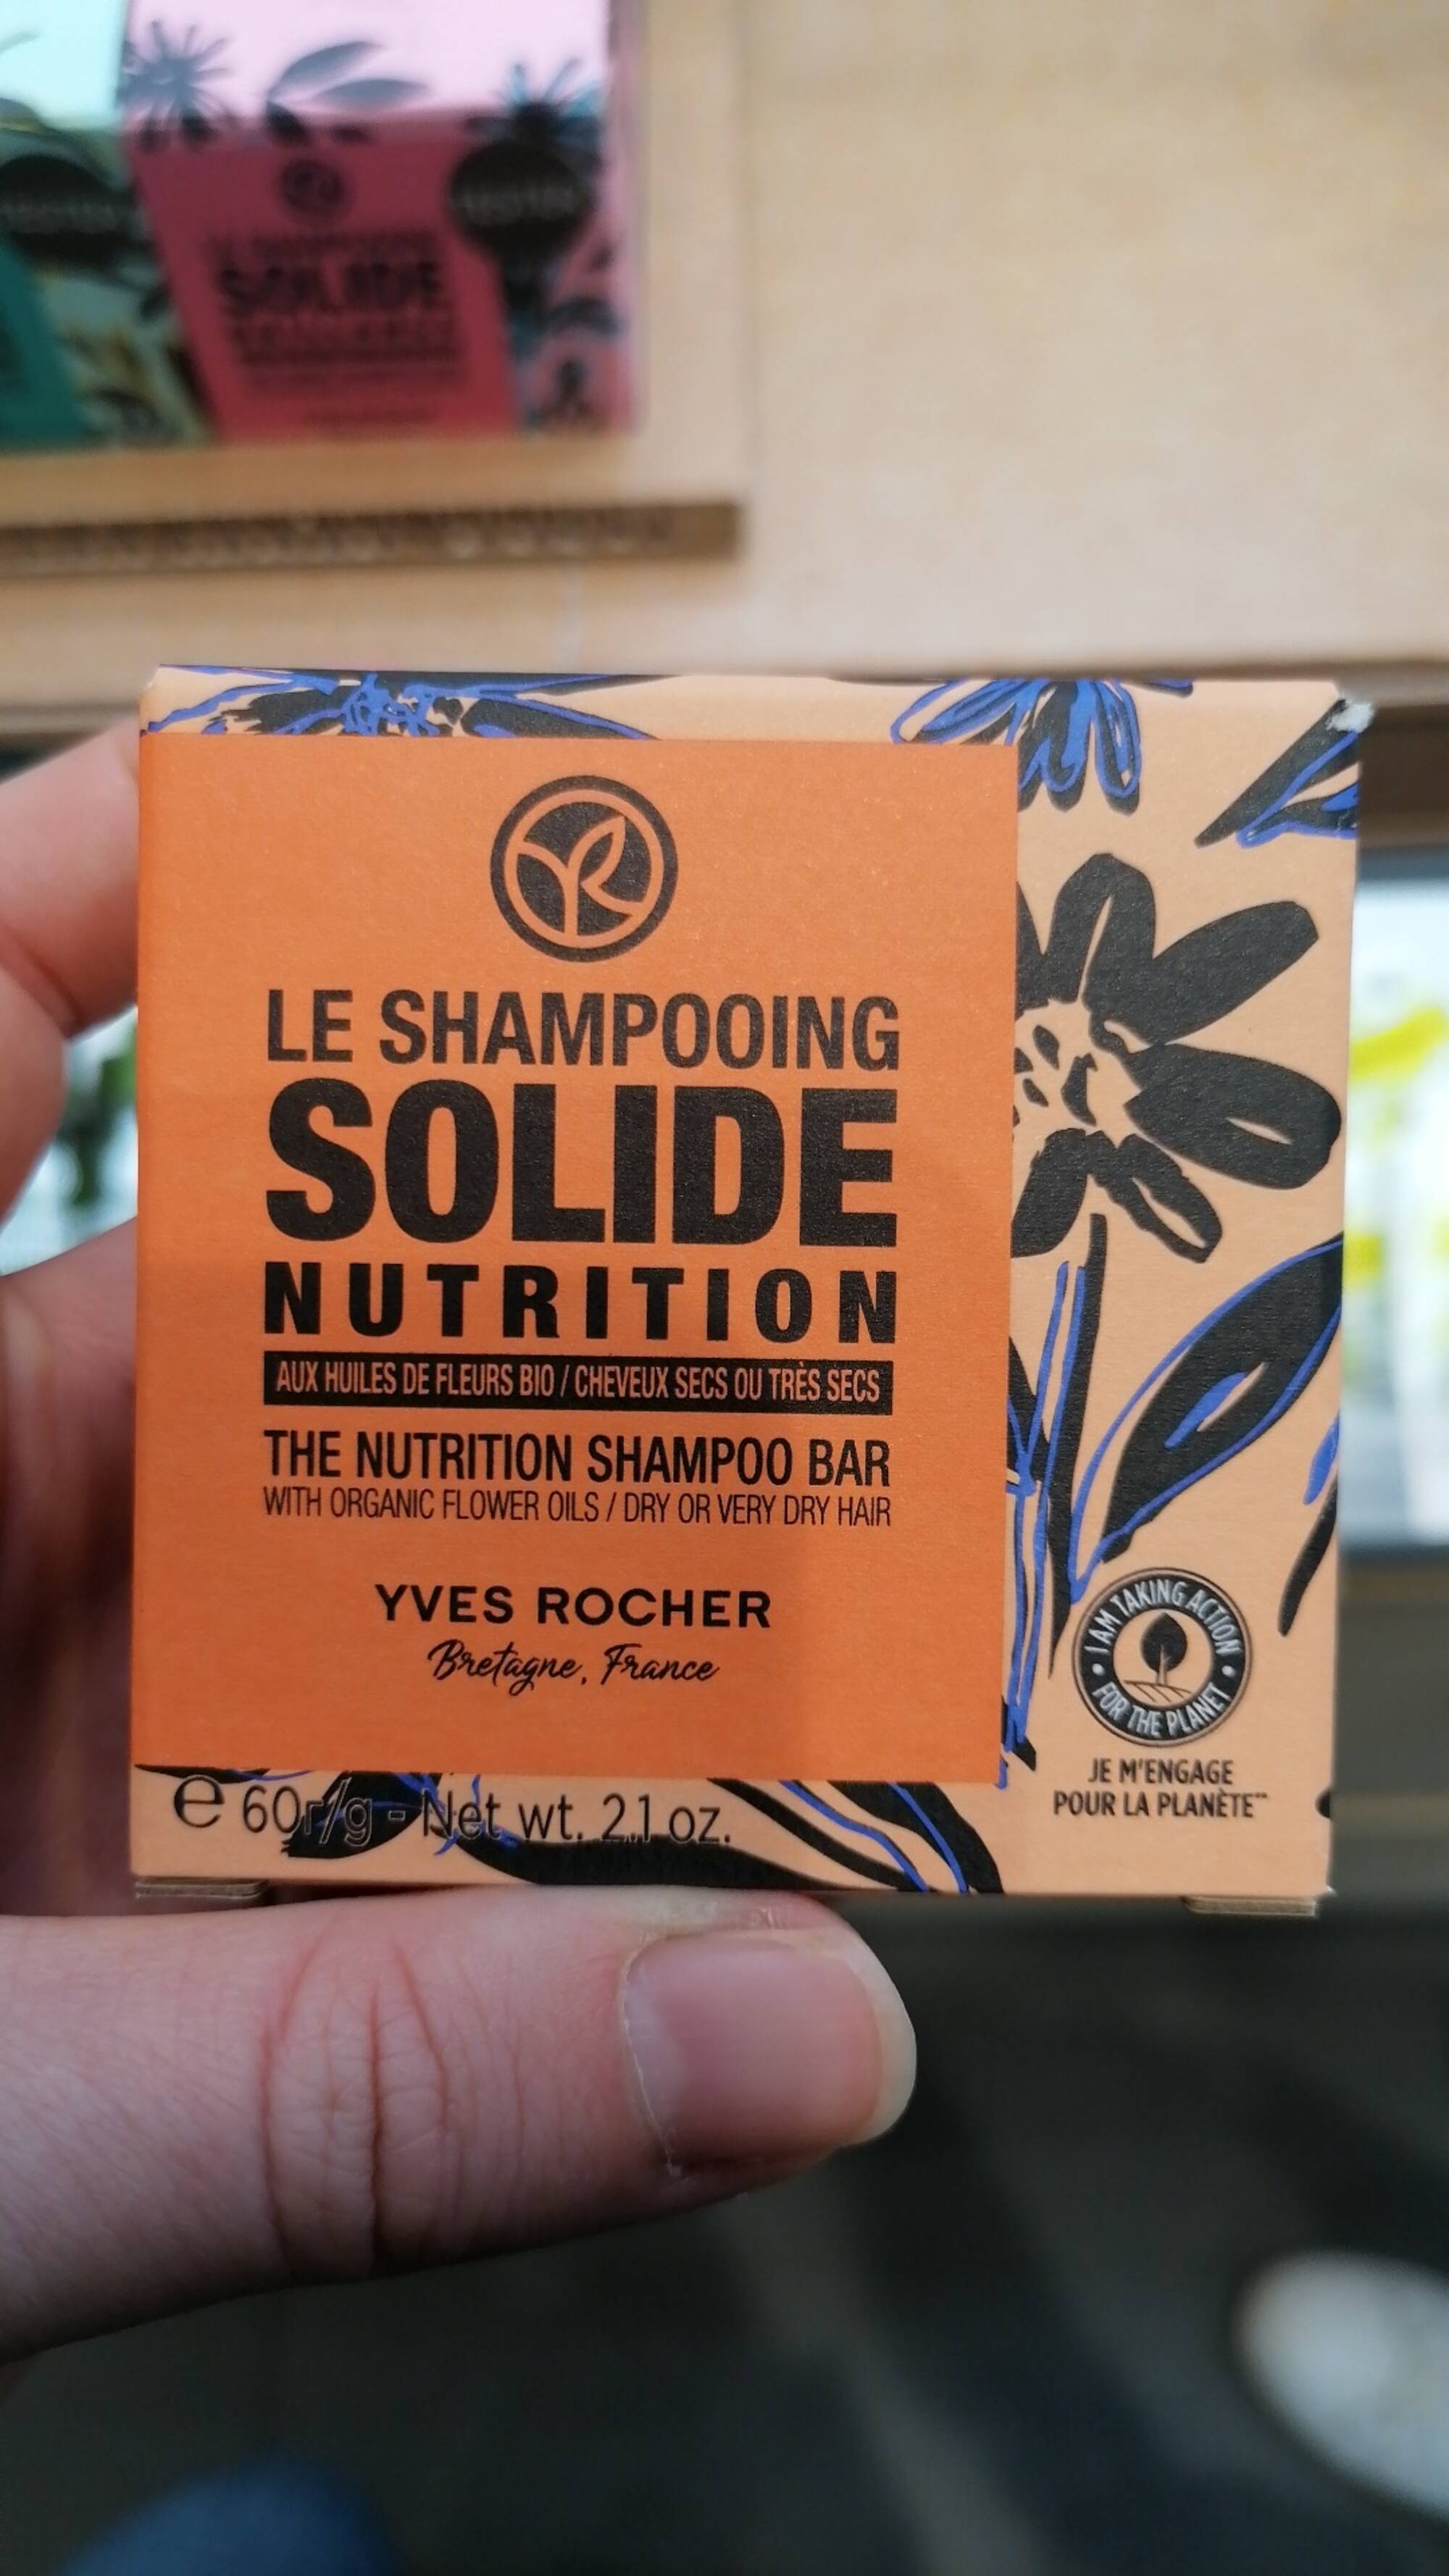 YVES ROCHER - Le shampooing solide nutrition